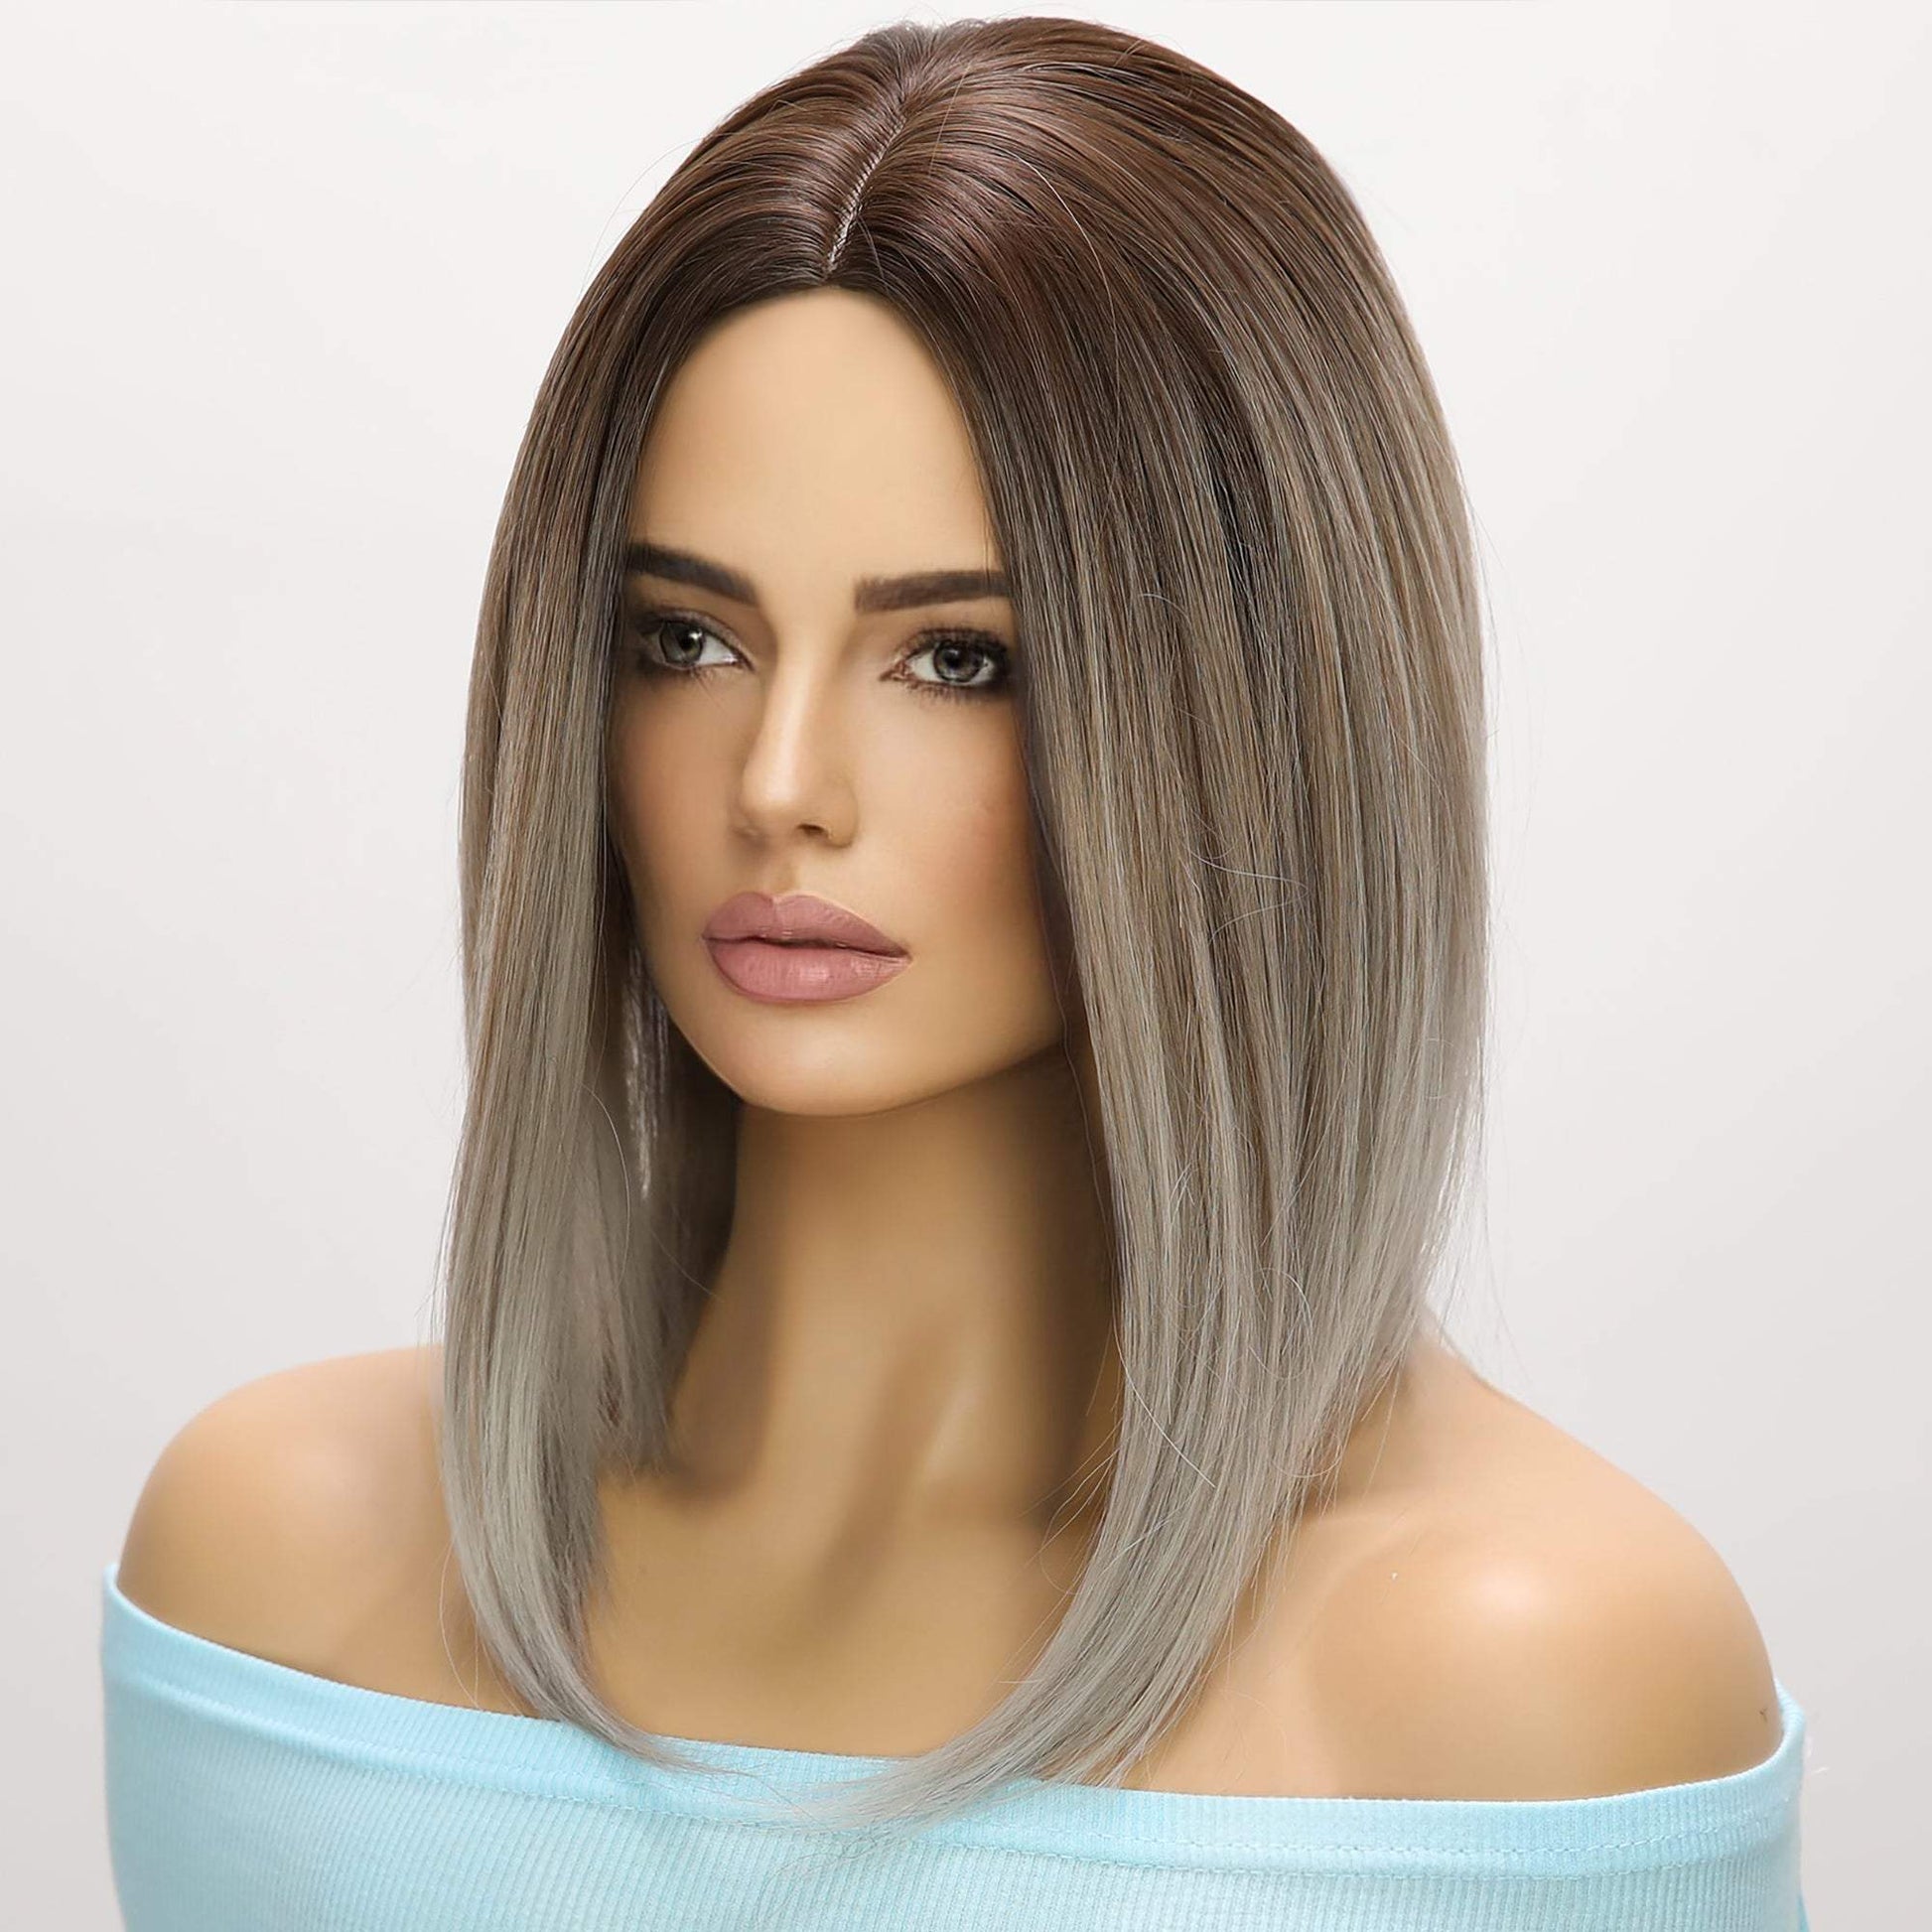 12-inch | Gray Highlight middle Part Stranght Bob | SM1639 - TapLike